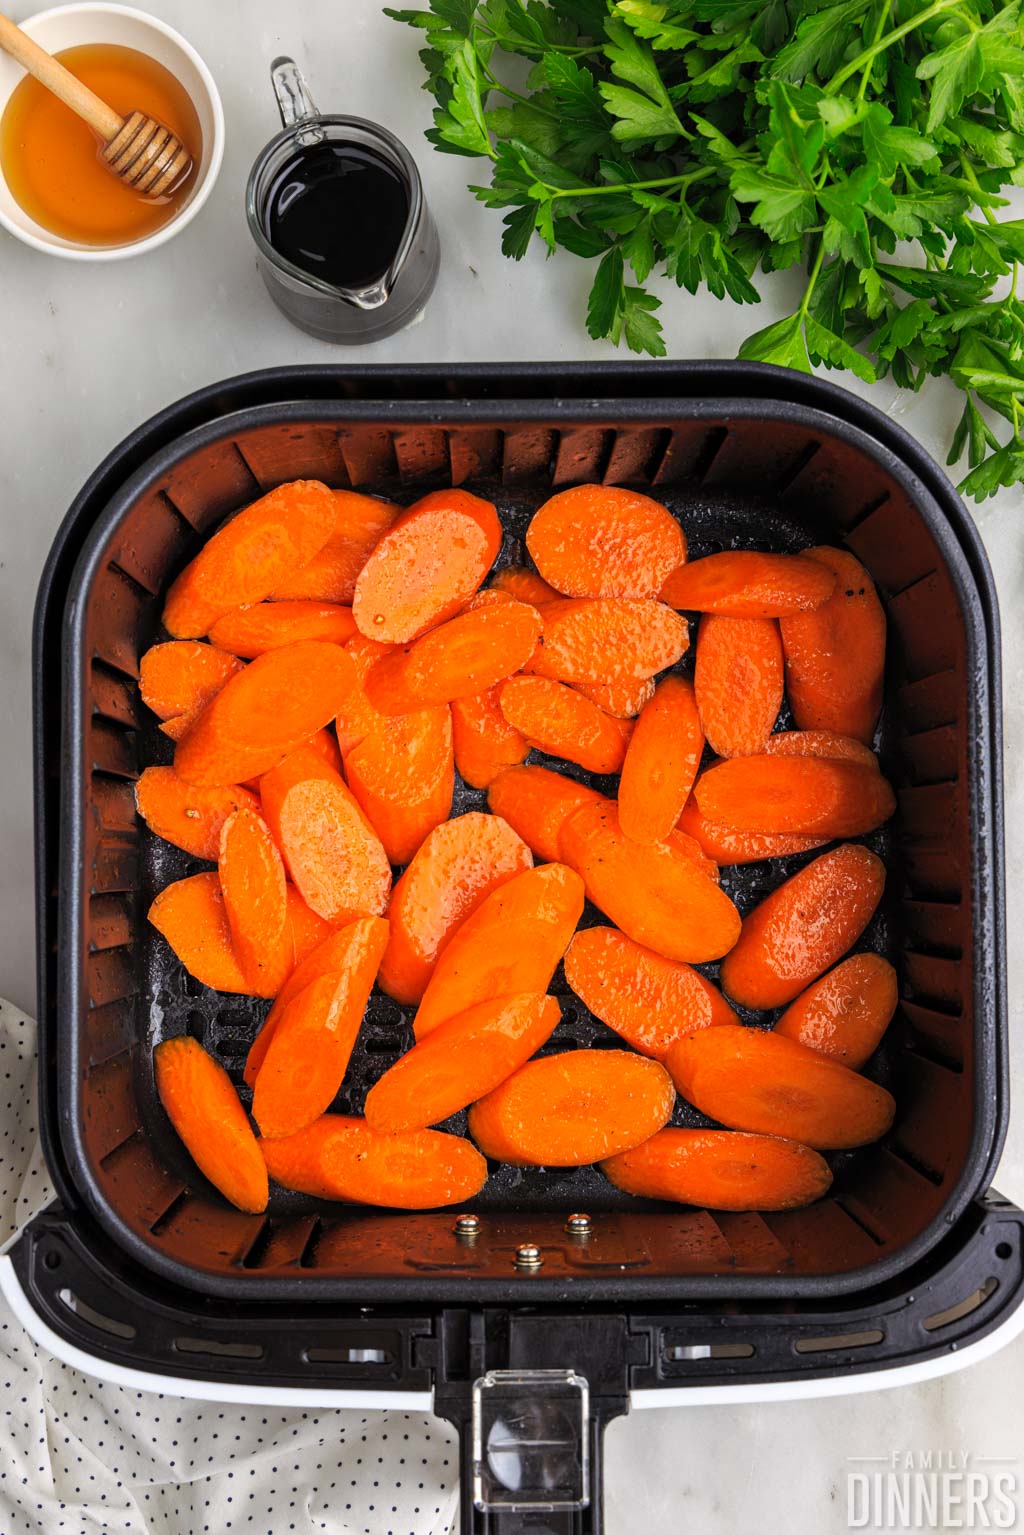 Carrots slices in the air fryer.